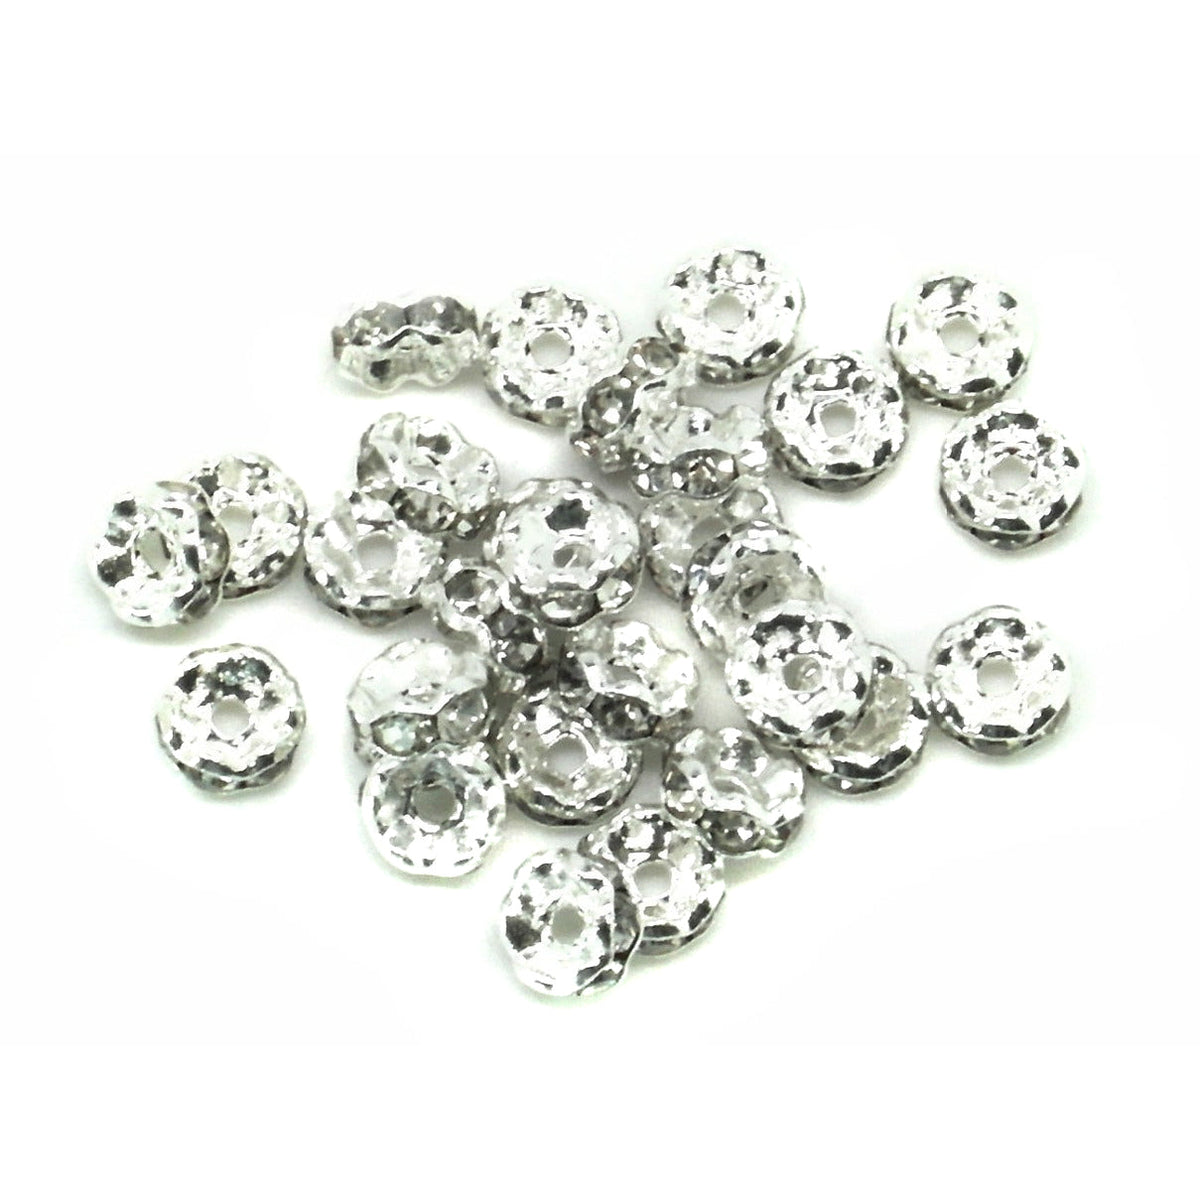 20 Sterling Silver Spacer Beads 5mm, 925 Silver Spacer Beads, Gear